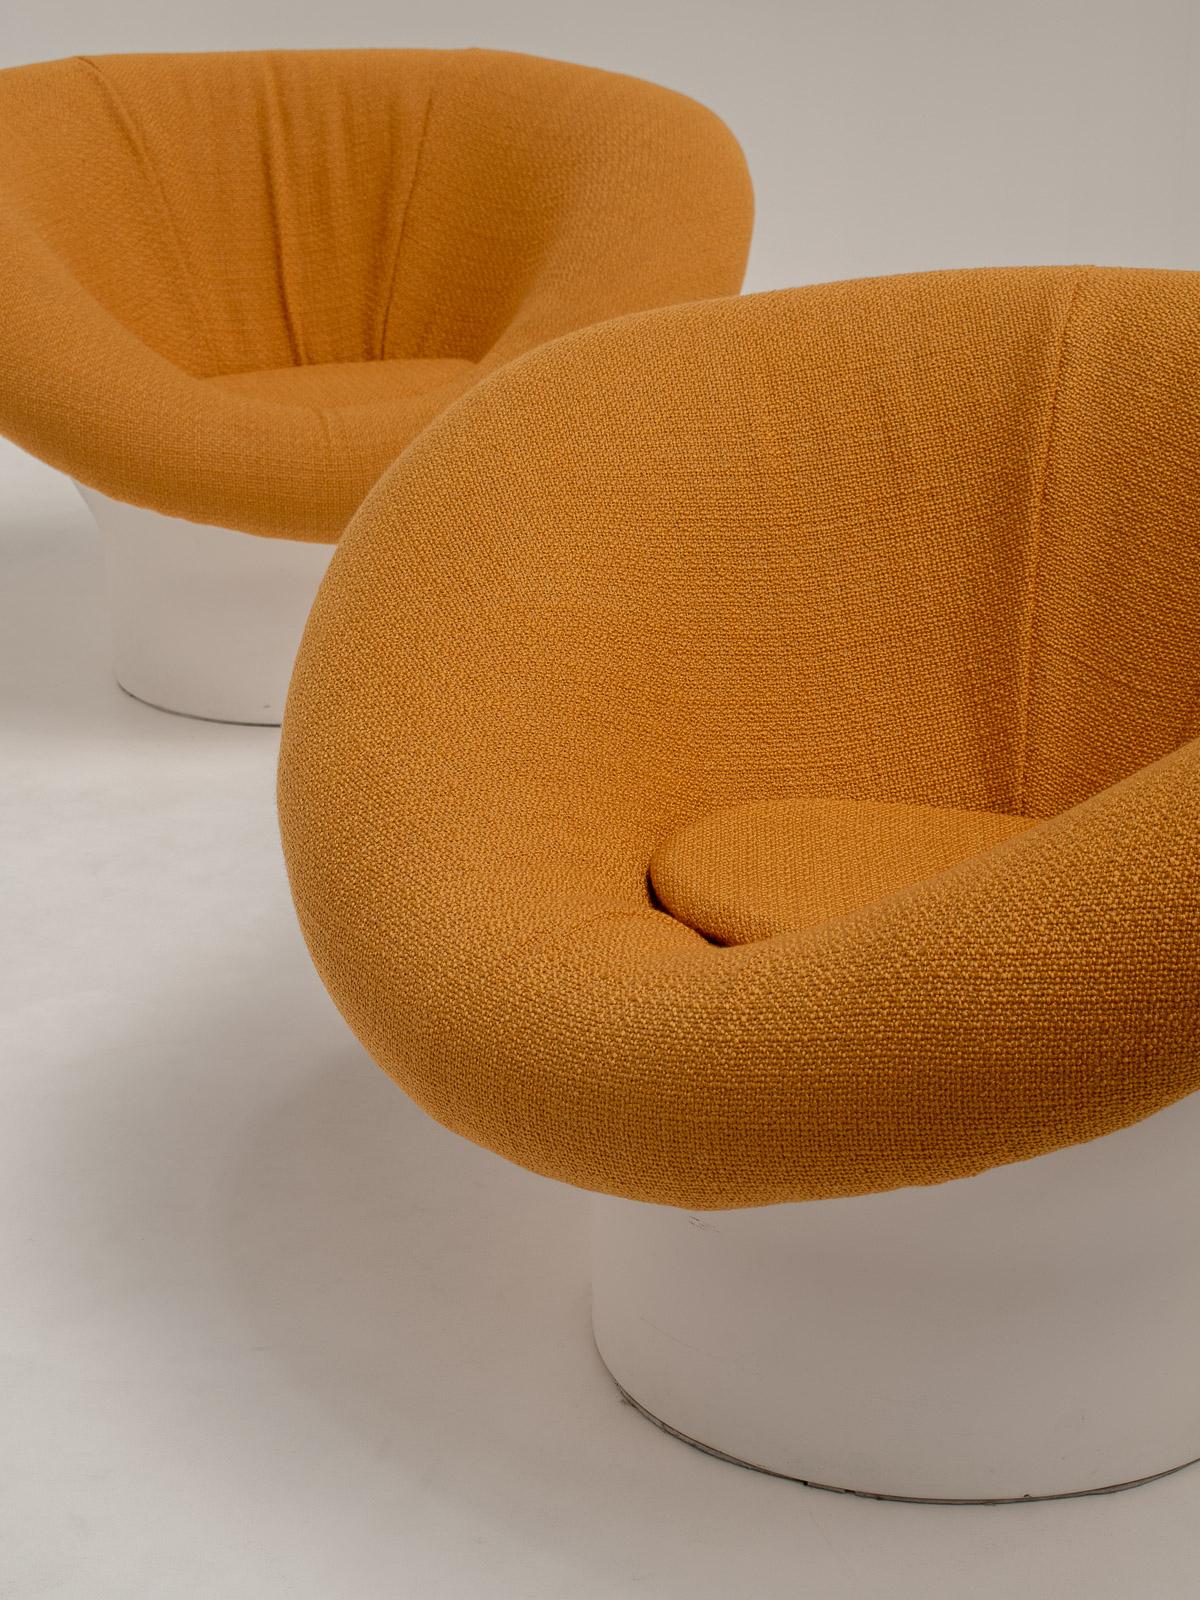 Pair of Krokus Lounge Chairs by Lennart Bender for Ulferts, Sweden 1960s For Sale 1